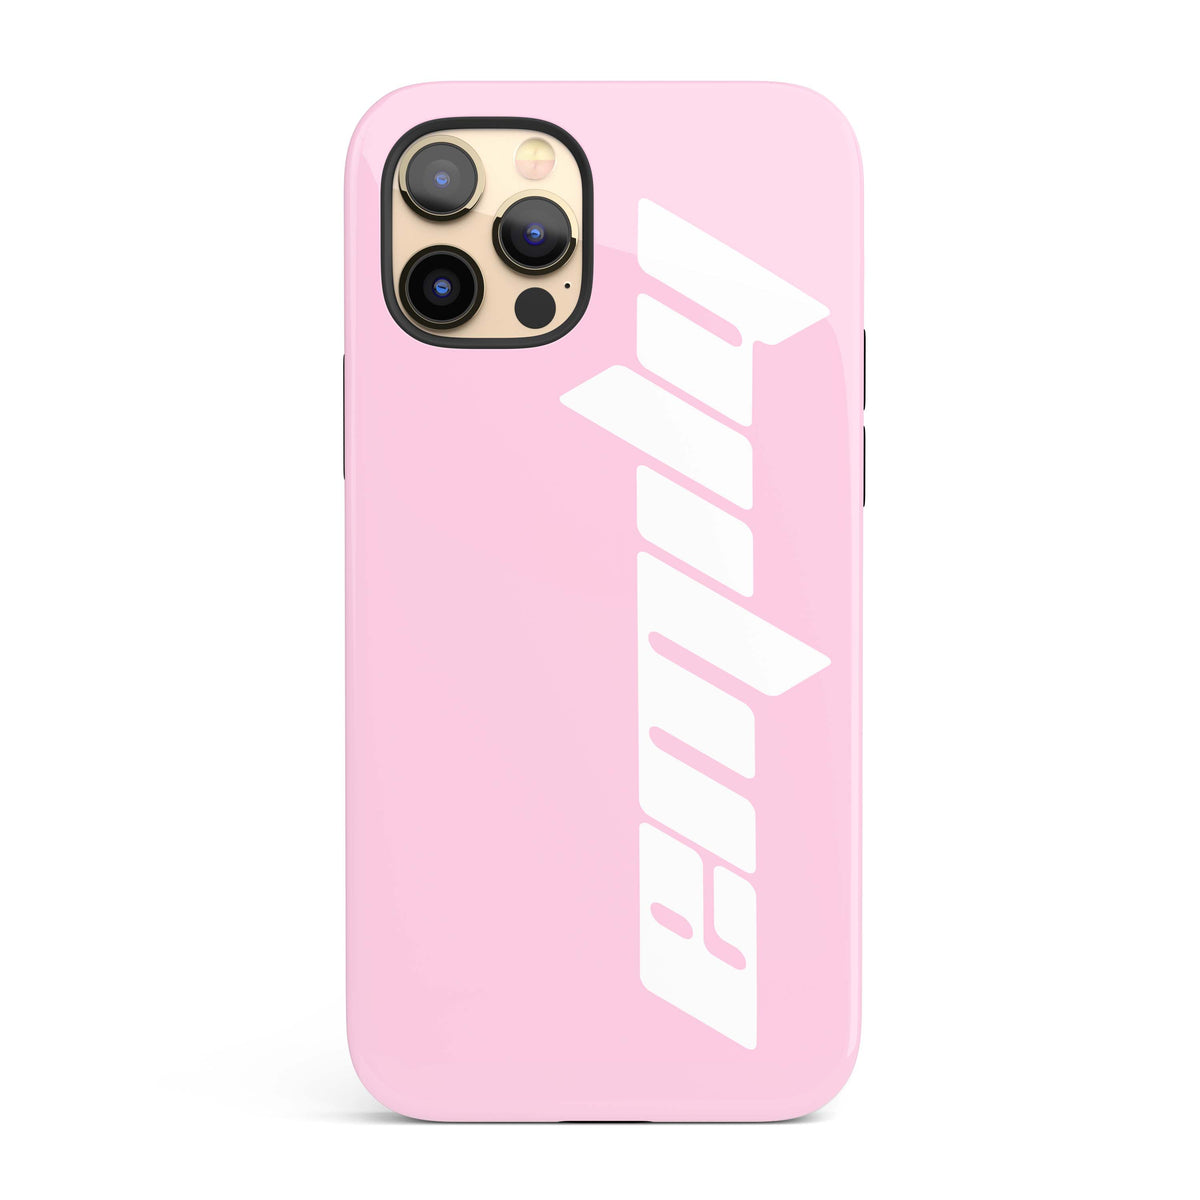 The Pink Boujee Case